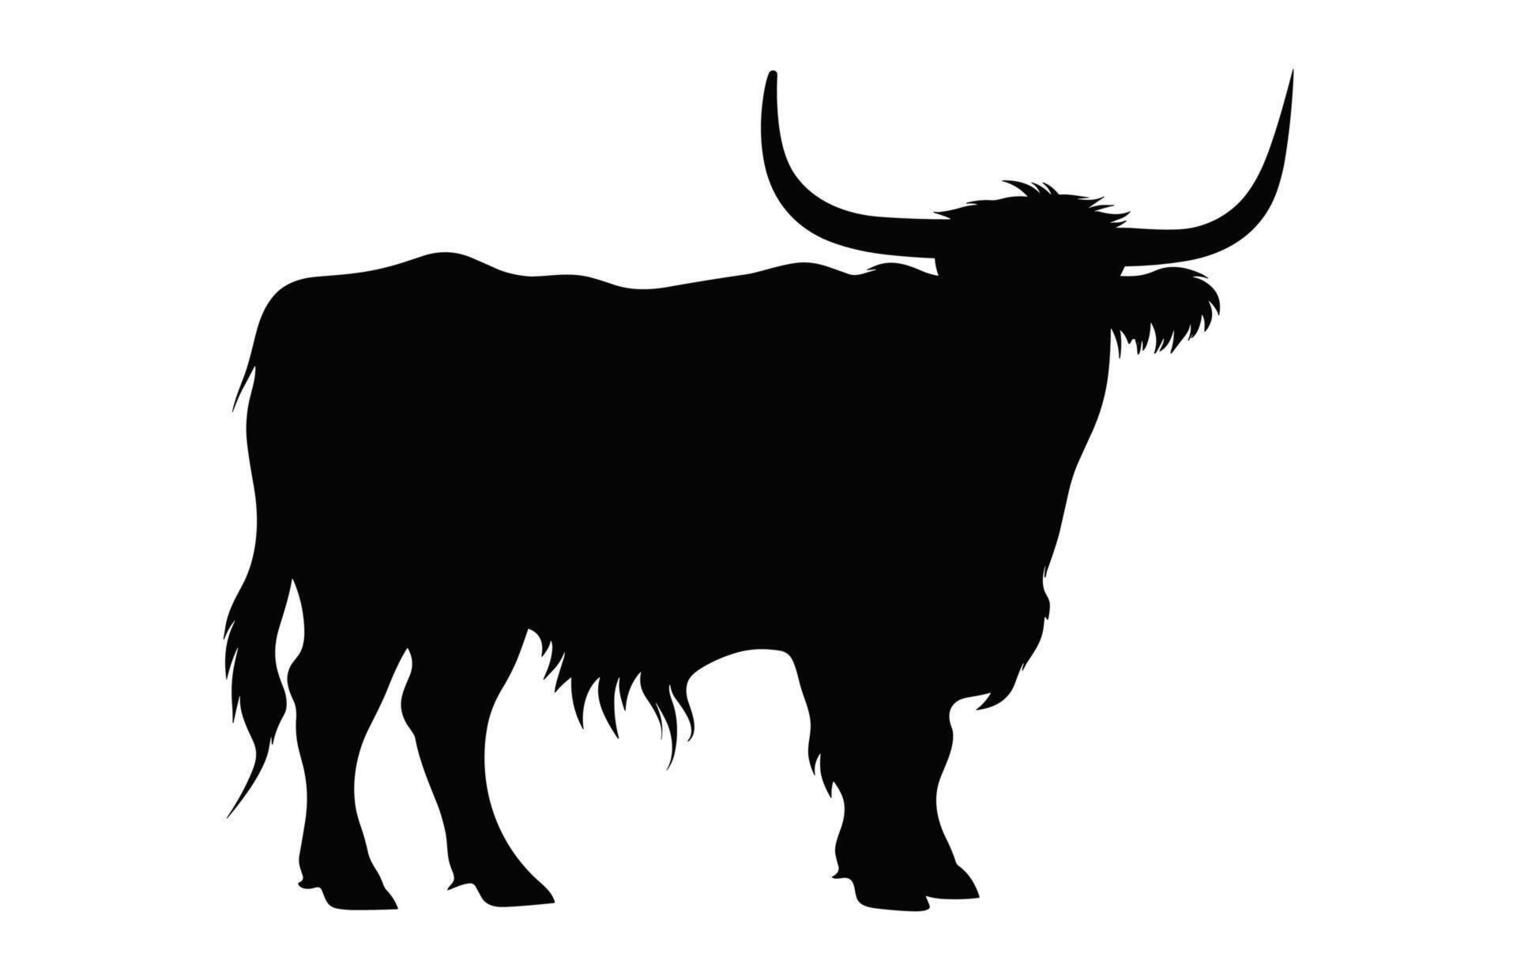 Highland Cow Silhouette isolated on a white background vector